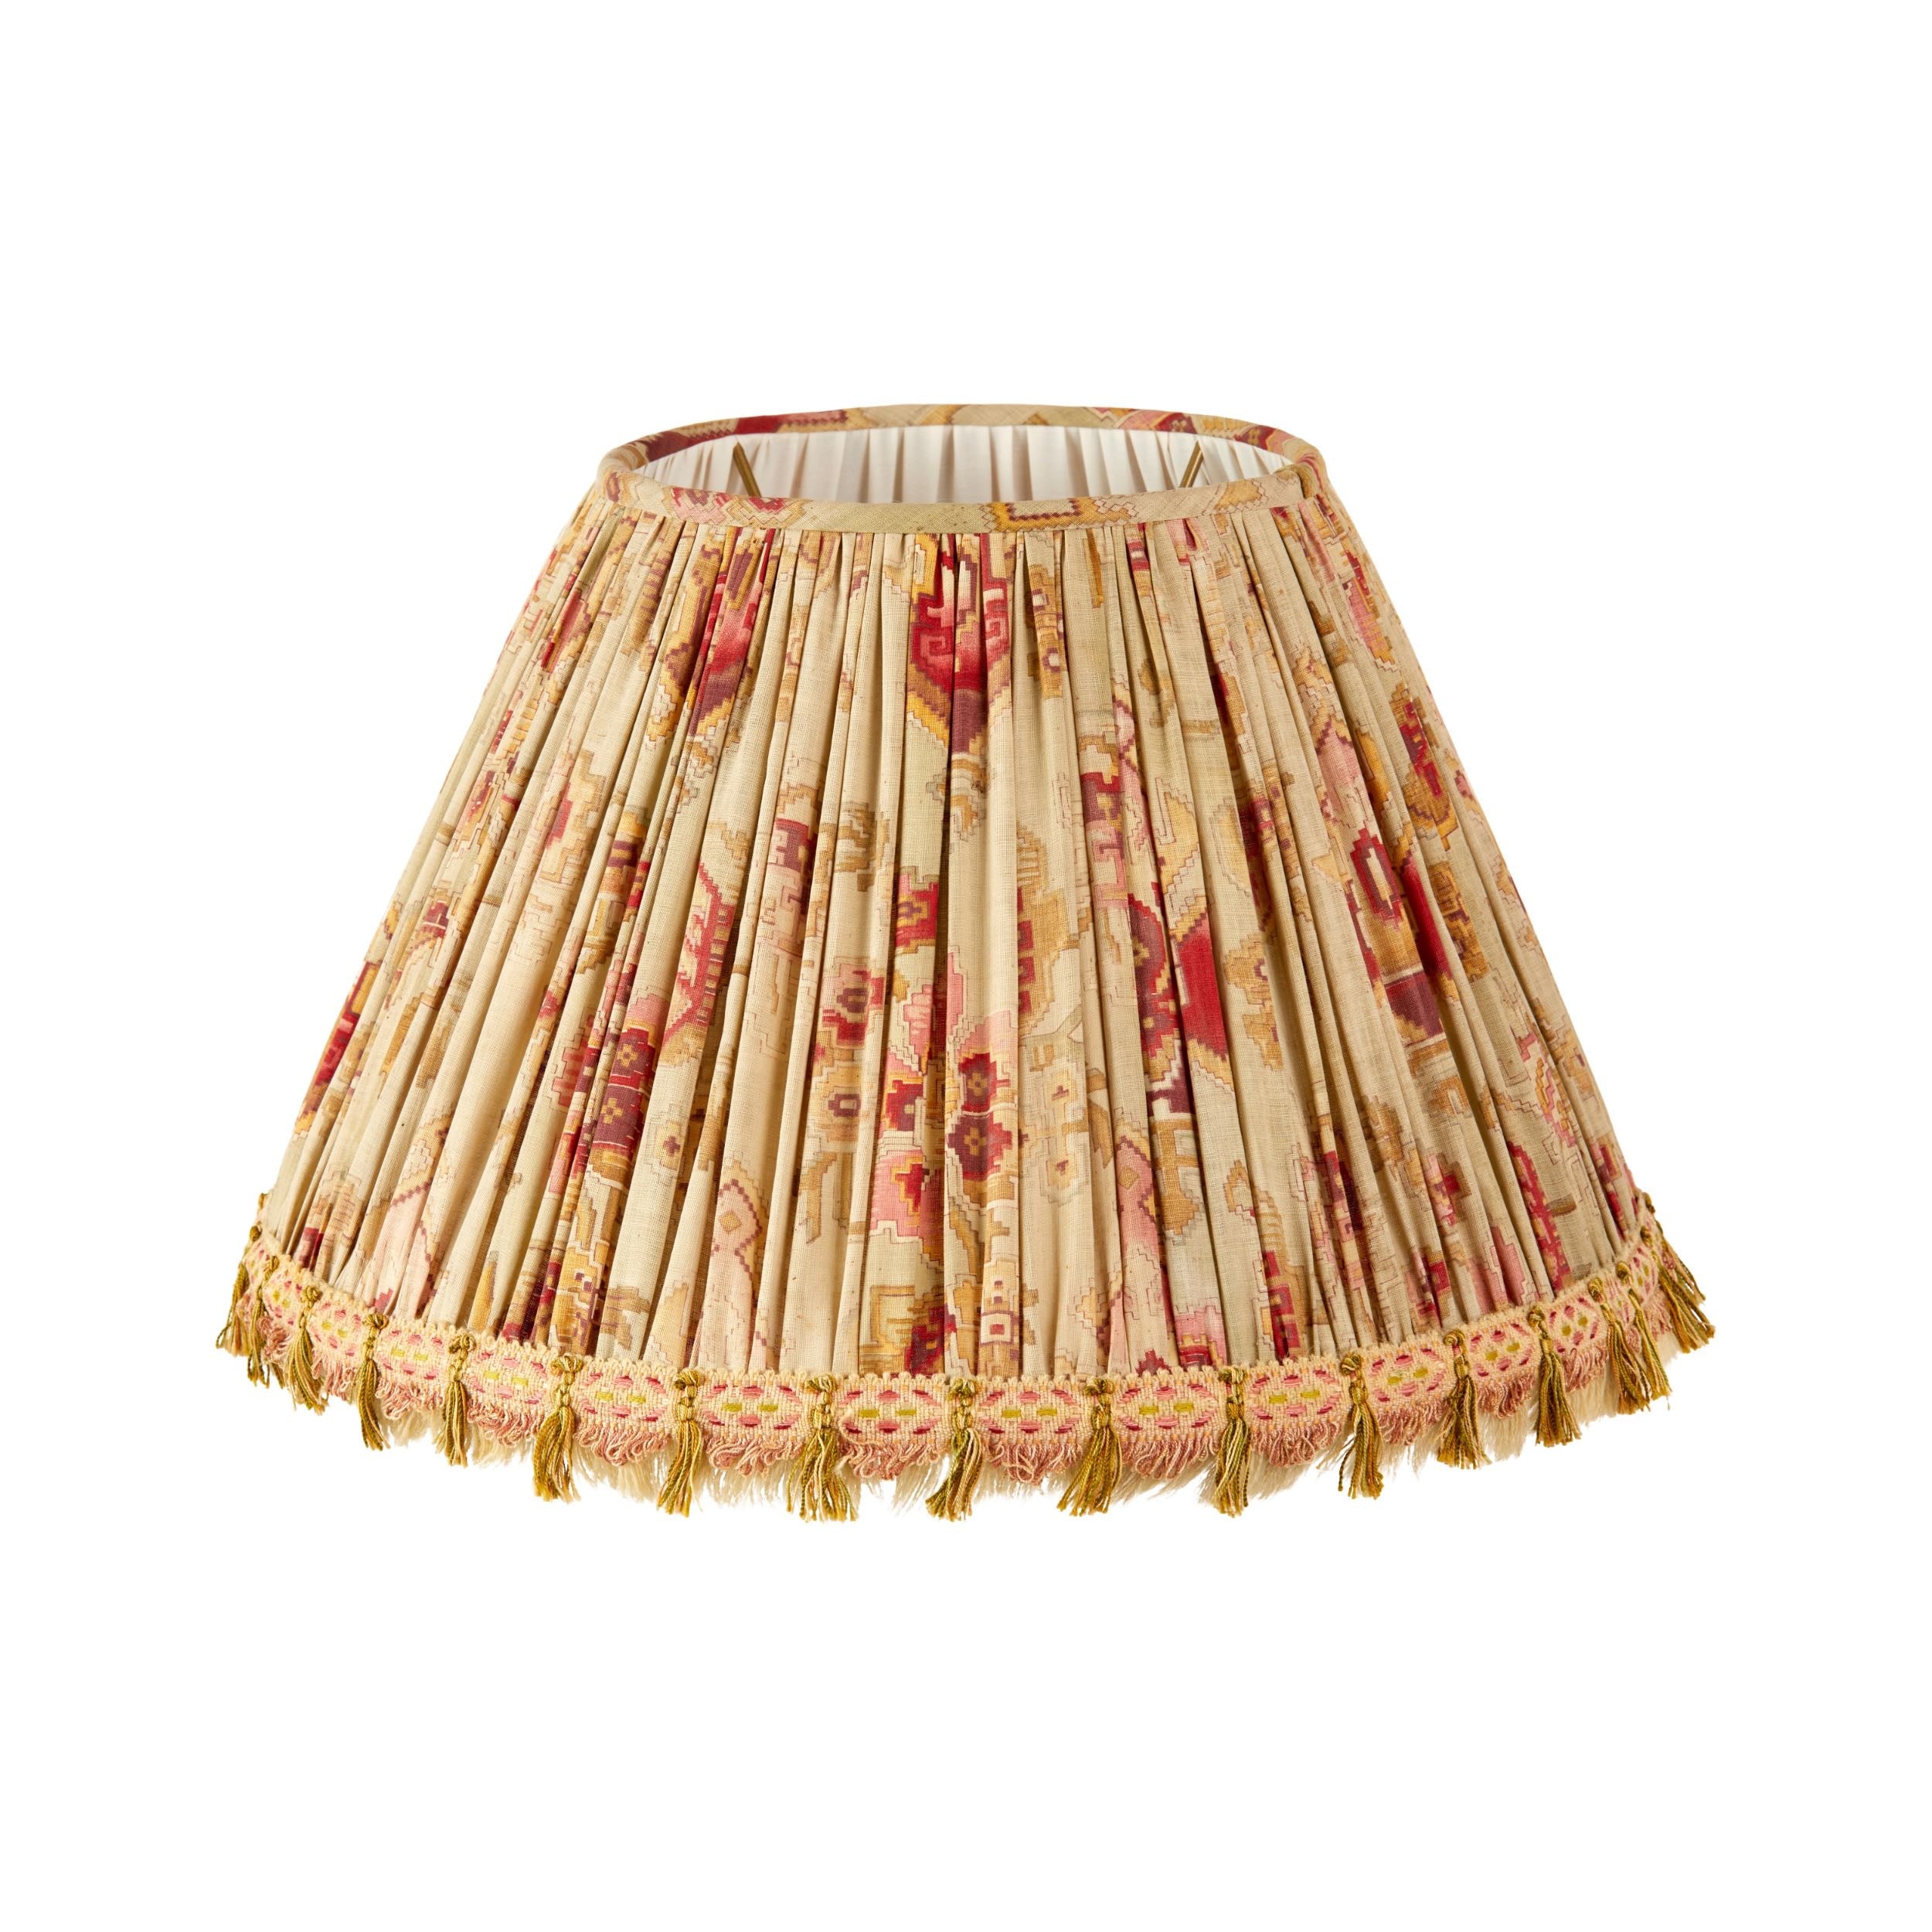 A Gathered Lampshade made from an Antique Screen Printed Cotton Voile with Woven Silk Frill